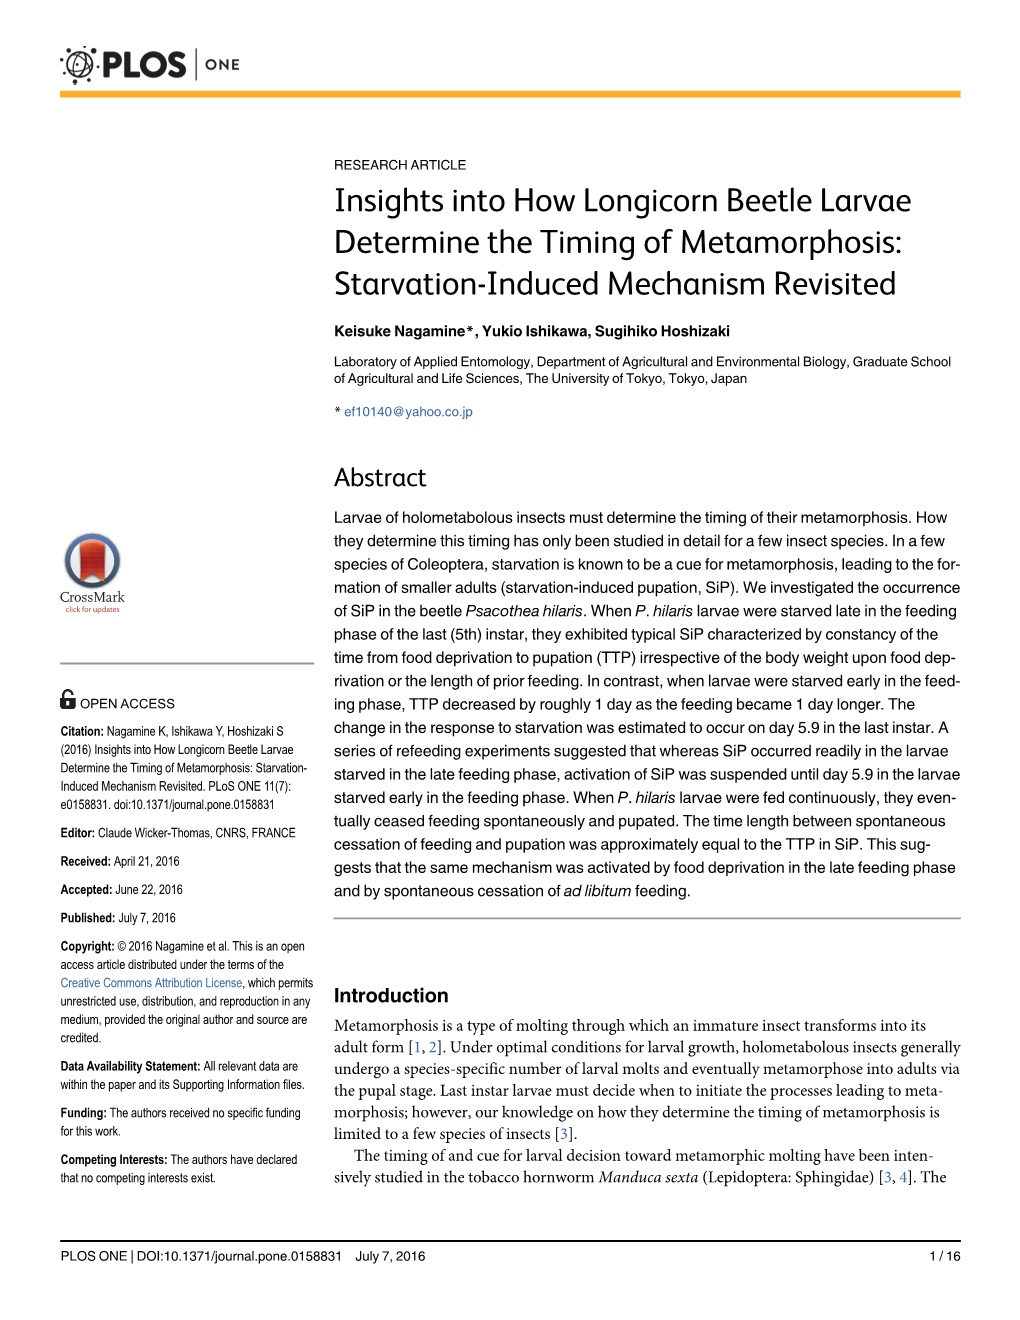 Insights Into How Longicorn Beetle Larvae Determine the Timing of Metamorphosis: Starvation-Induced Mechanism Revisited